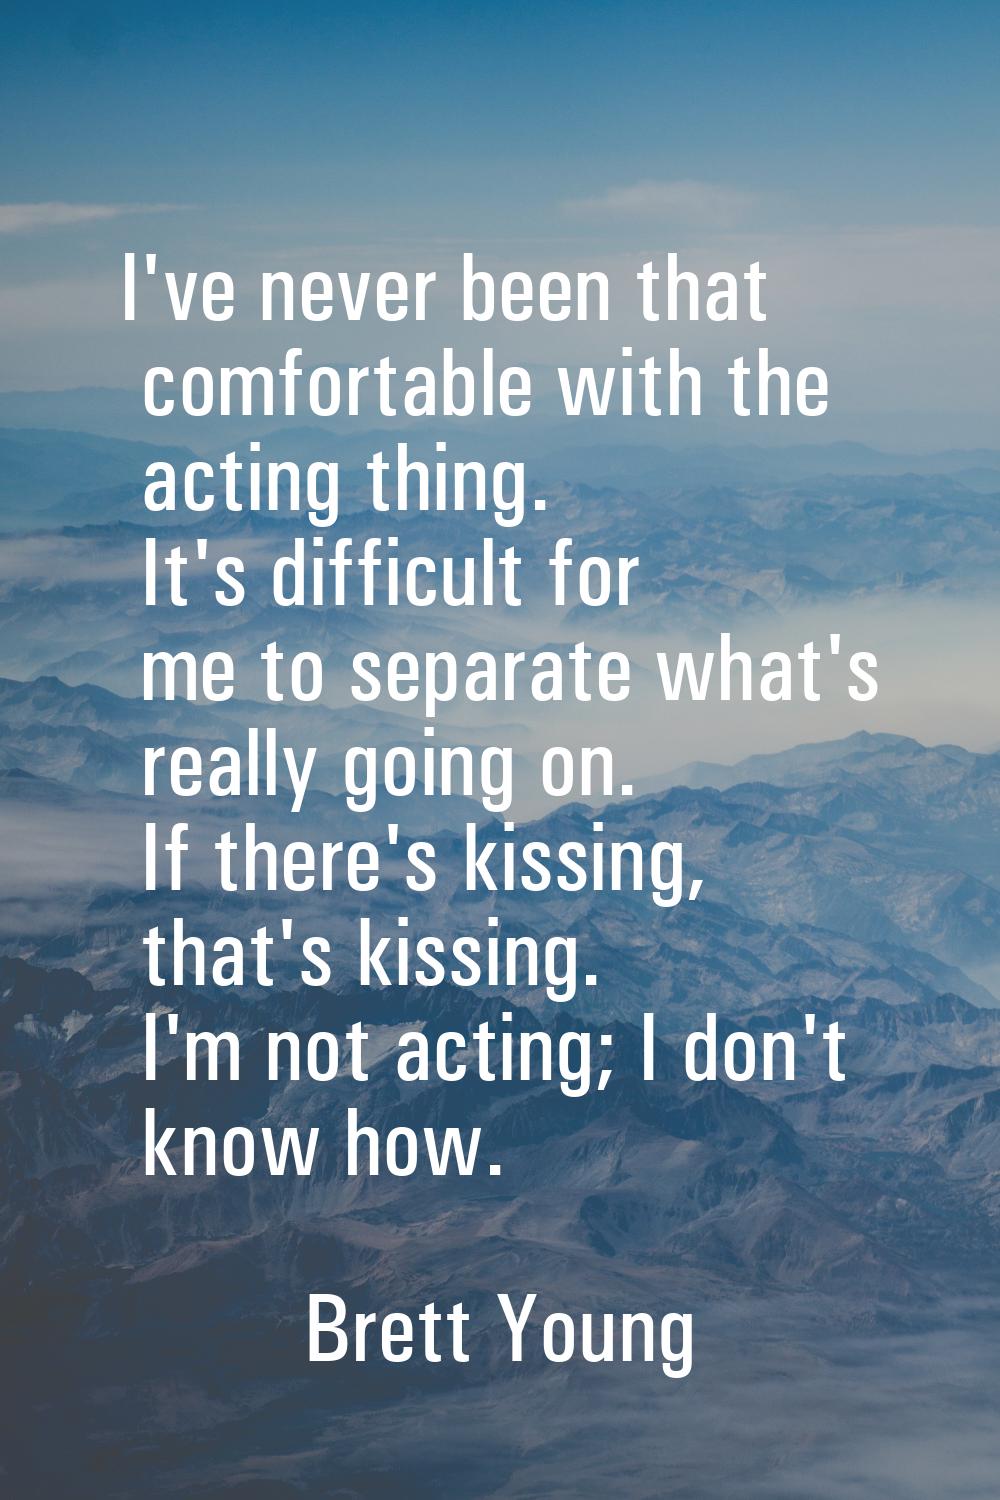 I've never been that comfortable with the acting thing. It's difficult for me to separate what's re